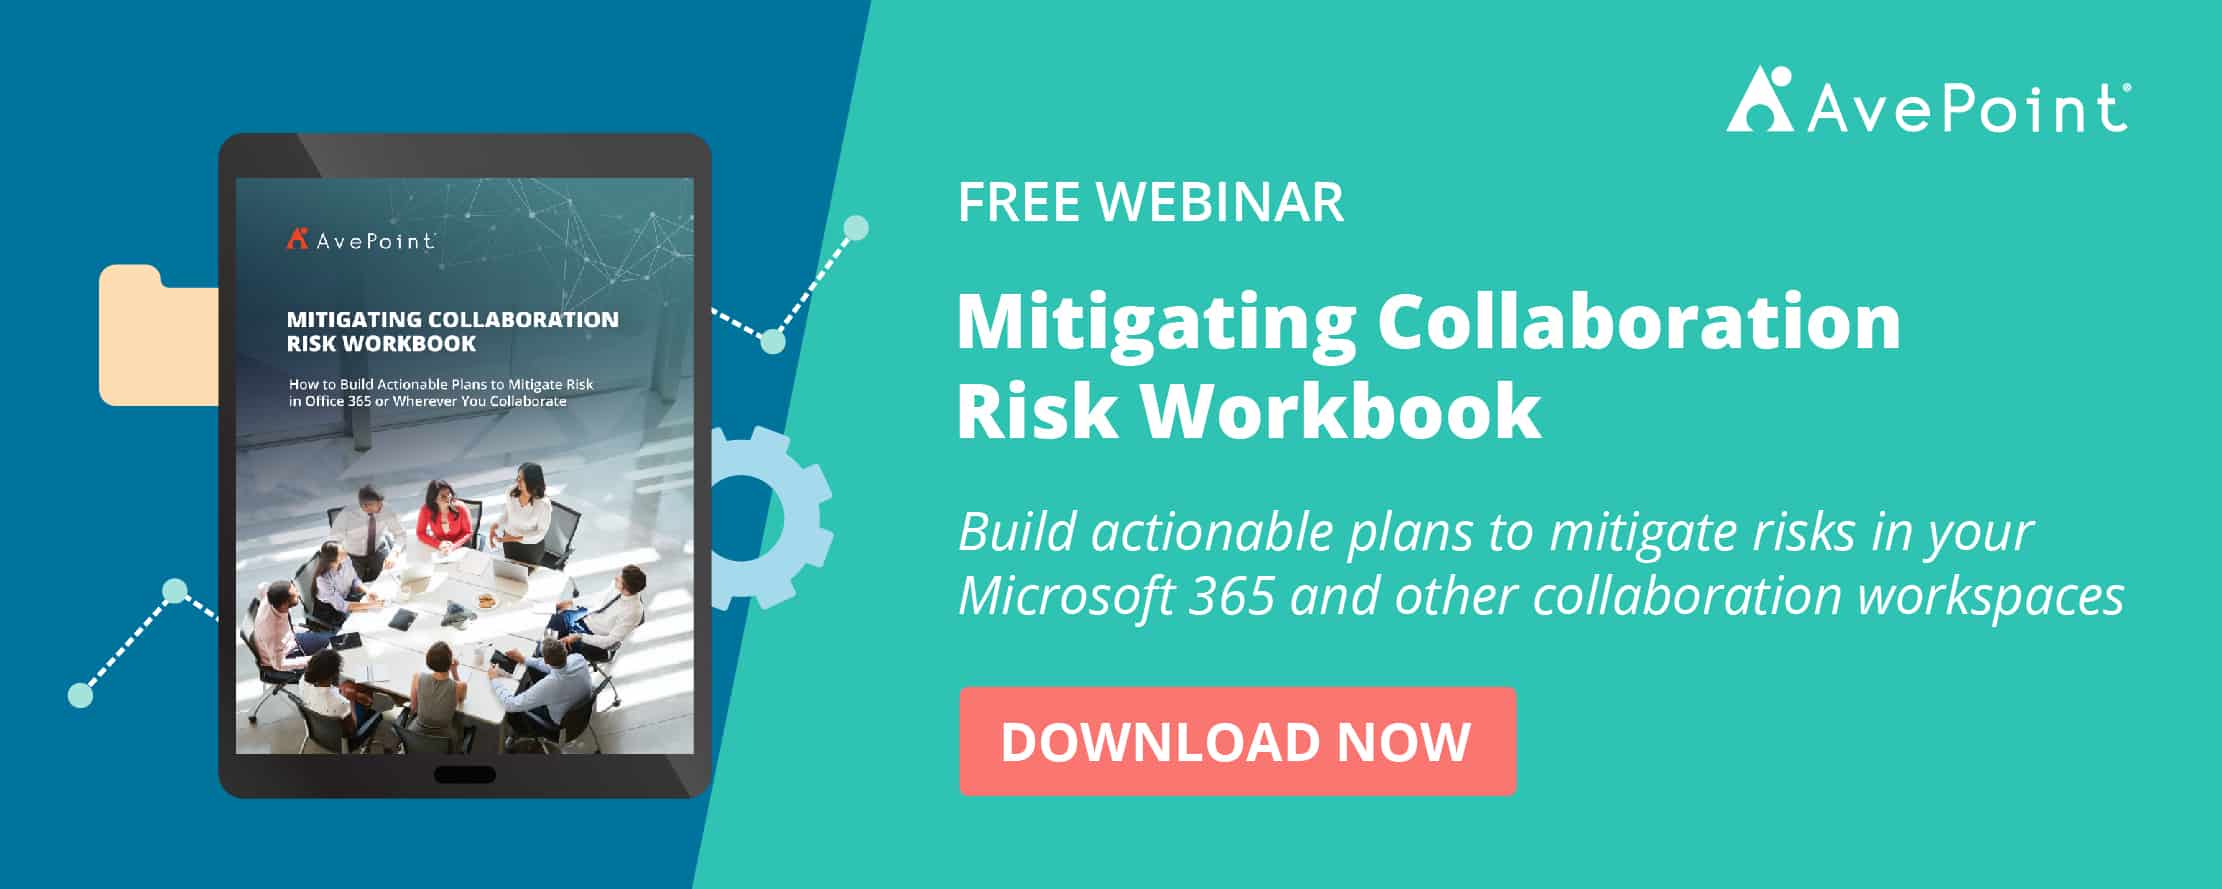 mitigating-collaboration-risks-in-microsoft-365-avepoint